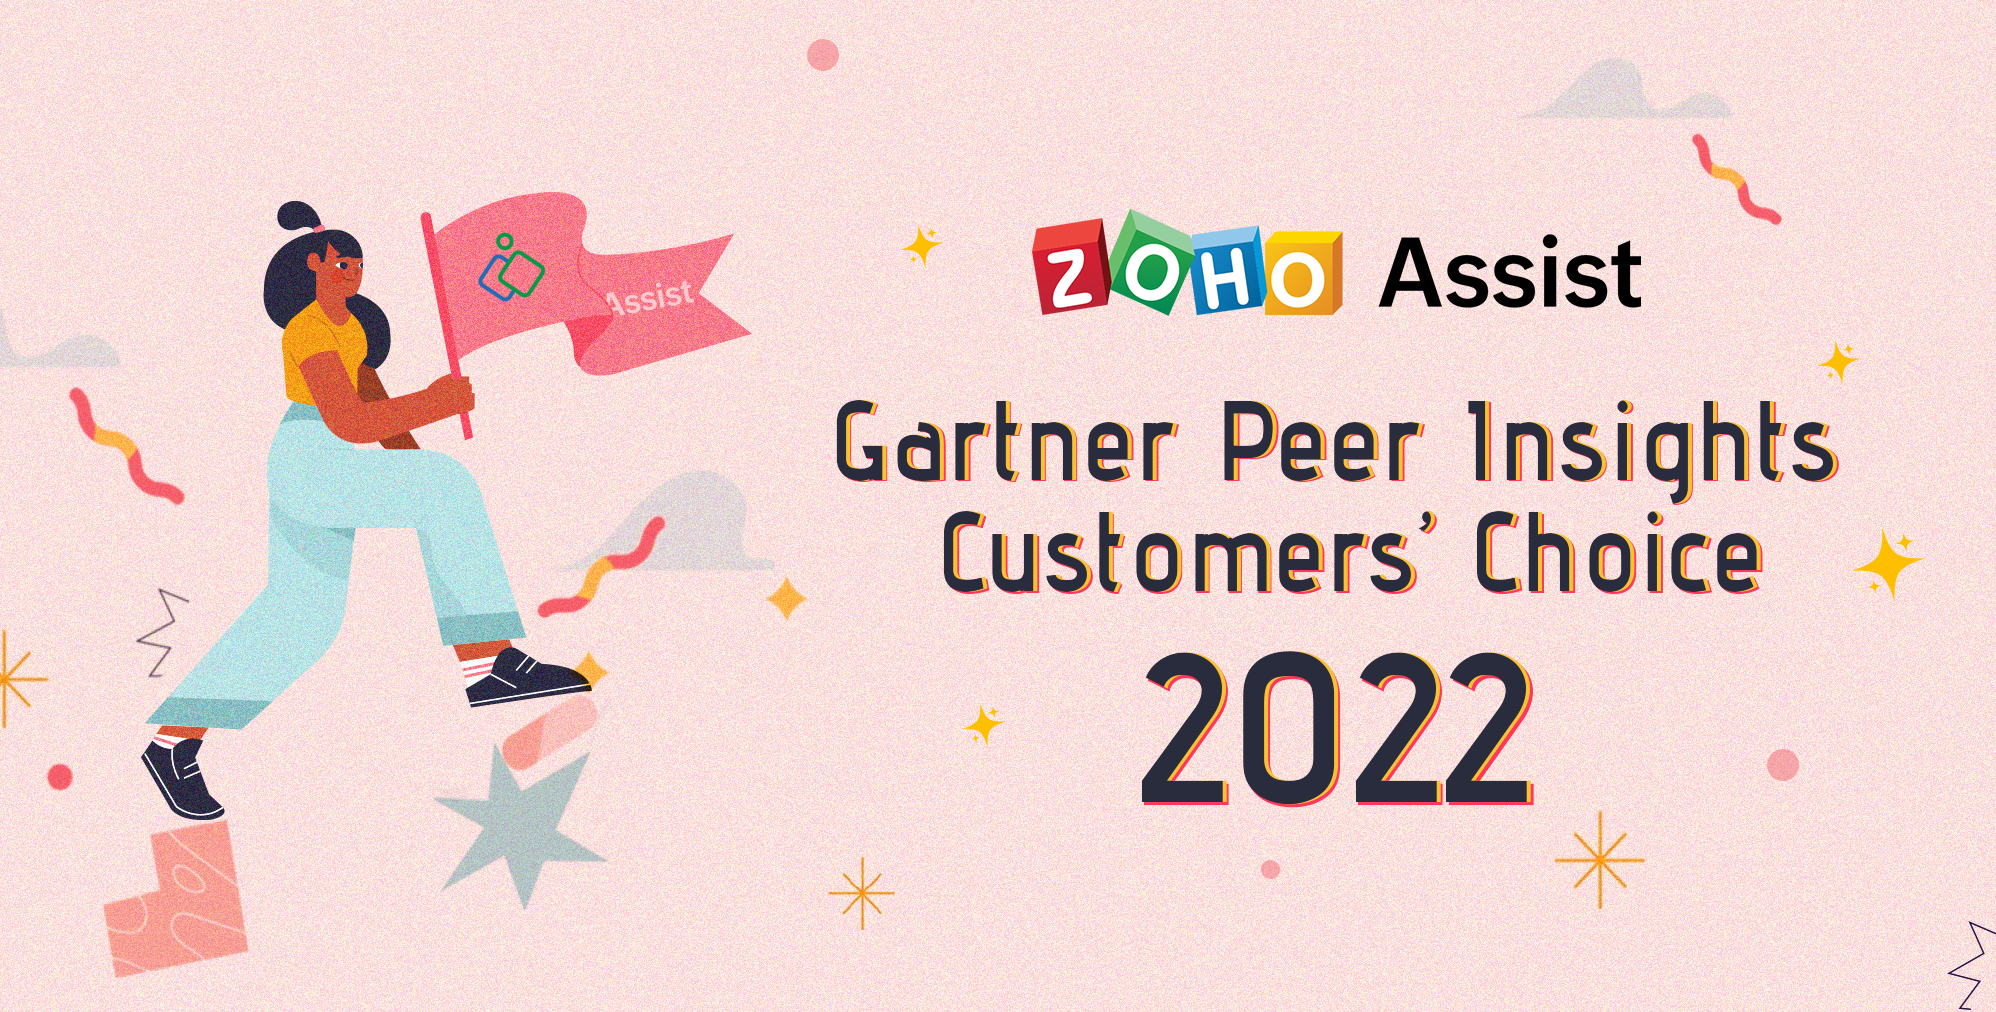 Announcing our latest recognition: Gartner® Peer Insights™ recognizes Zoho Assist as a 2022 Customers’ Choice for Meeting Solutions